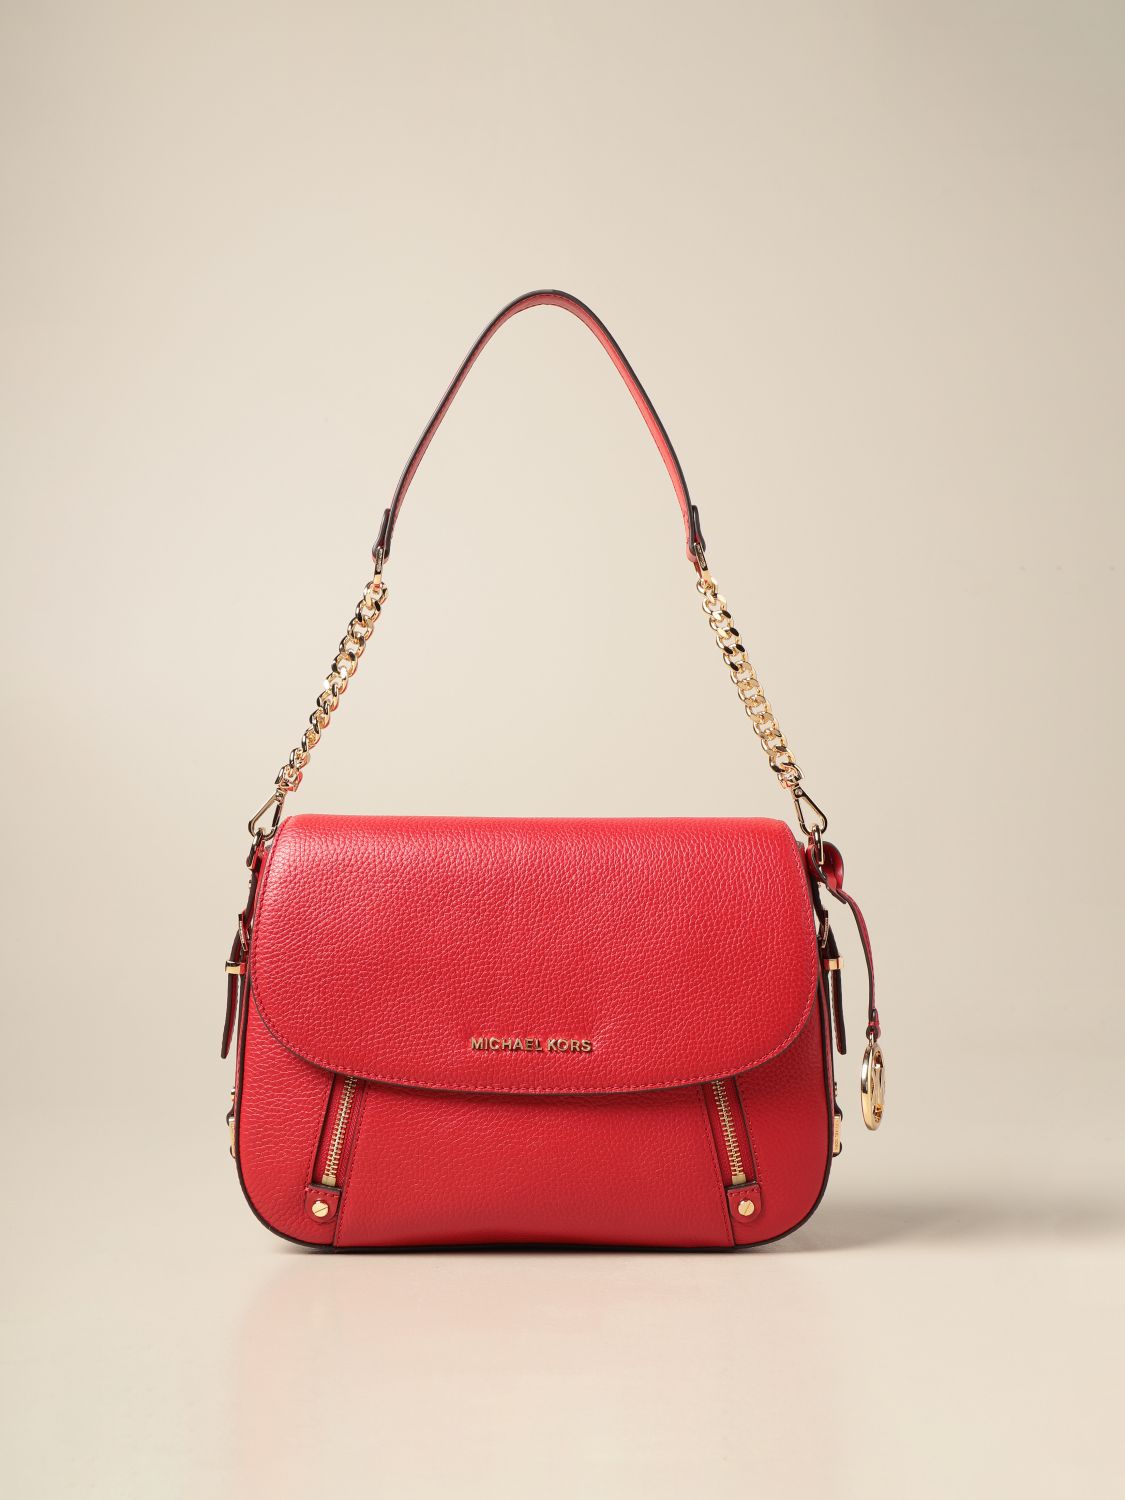 MICHAEL KORS: Bedford Legacy Michael bag in grained leather - Red